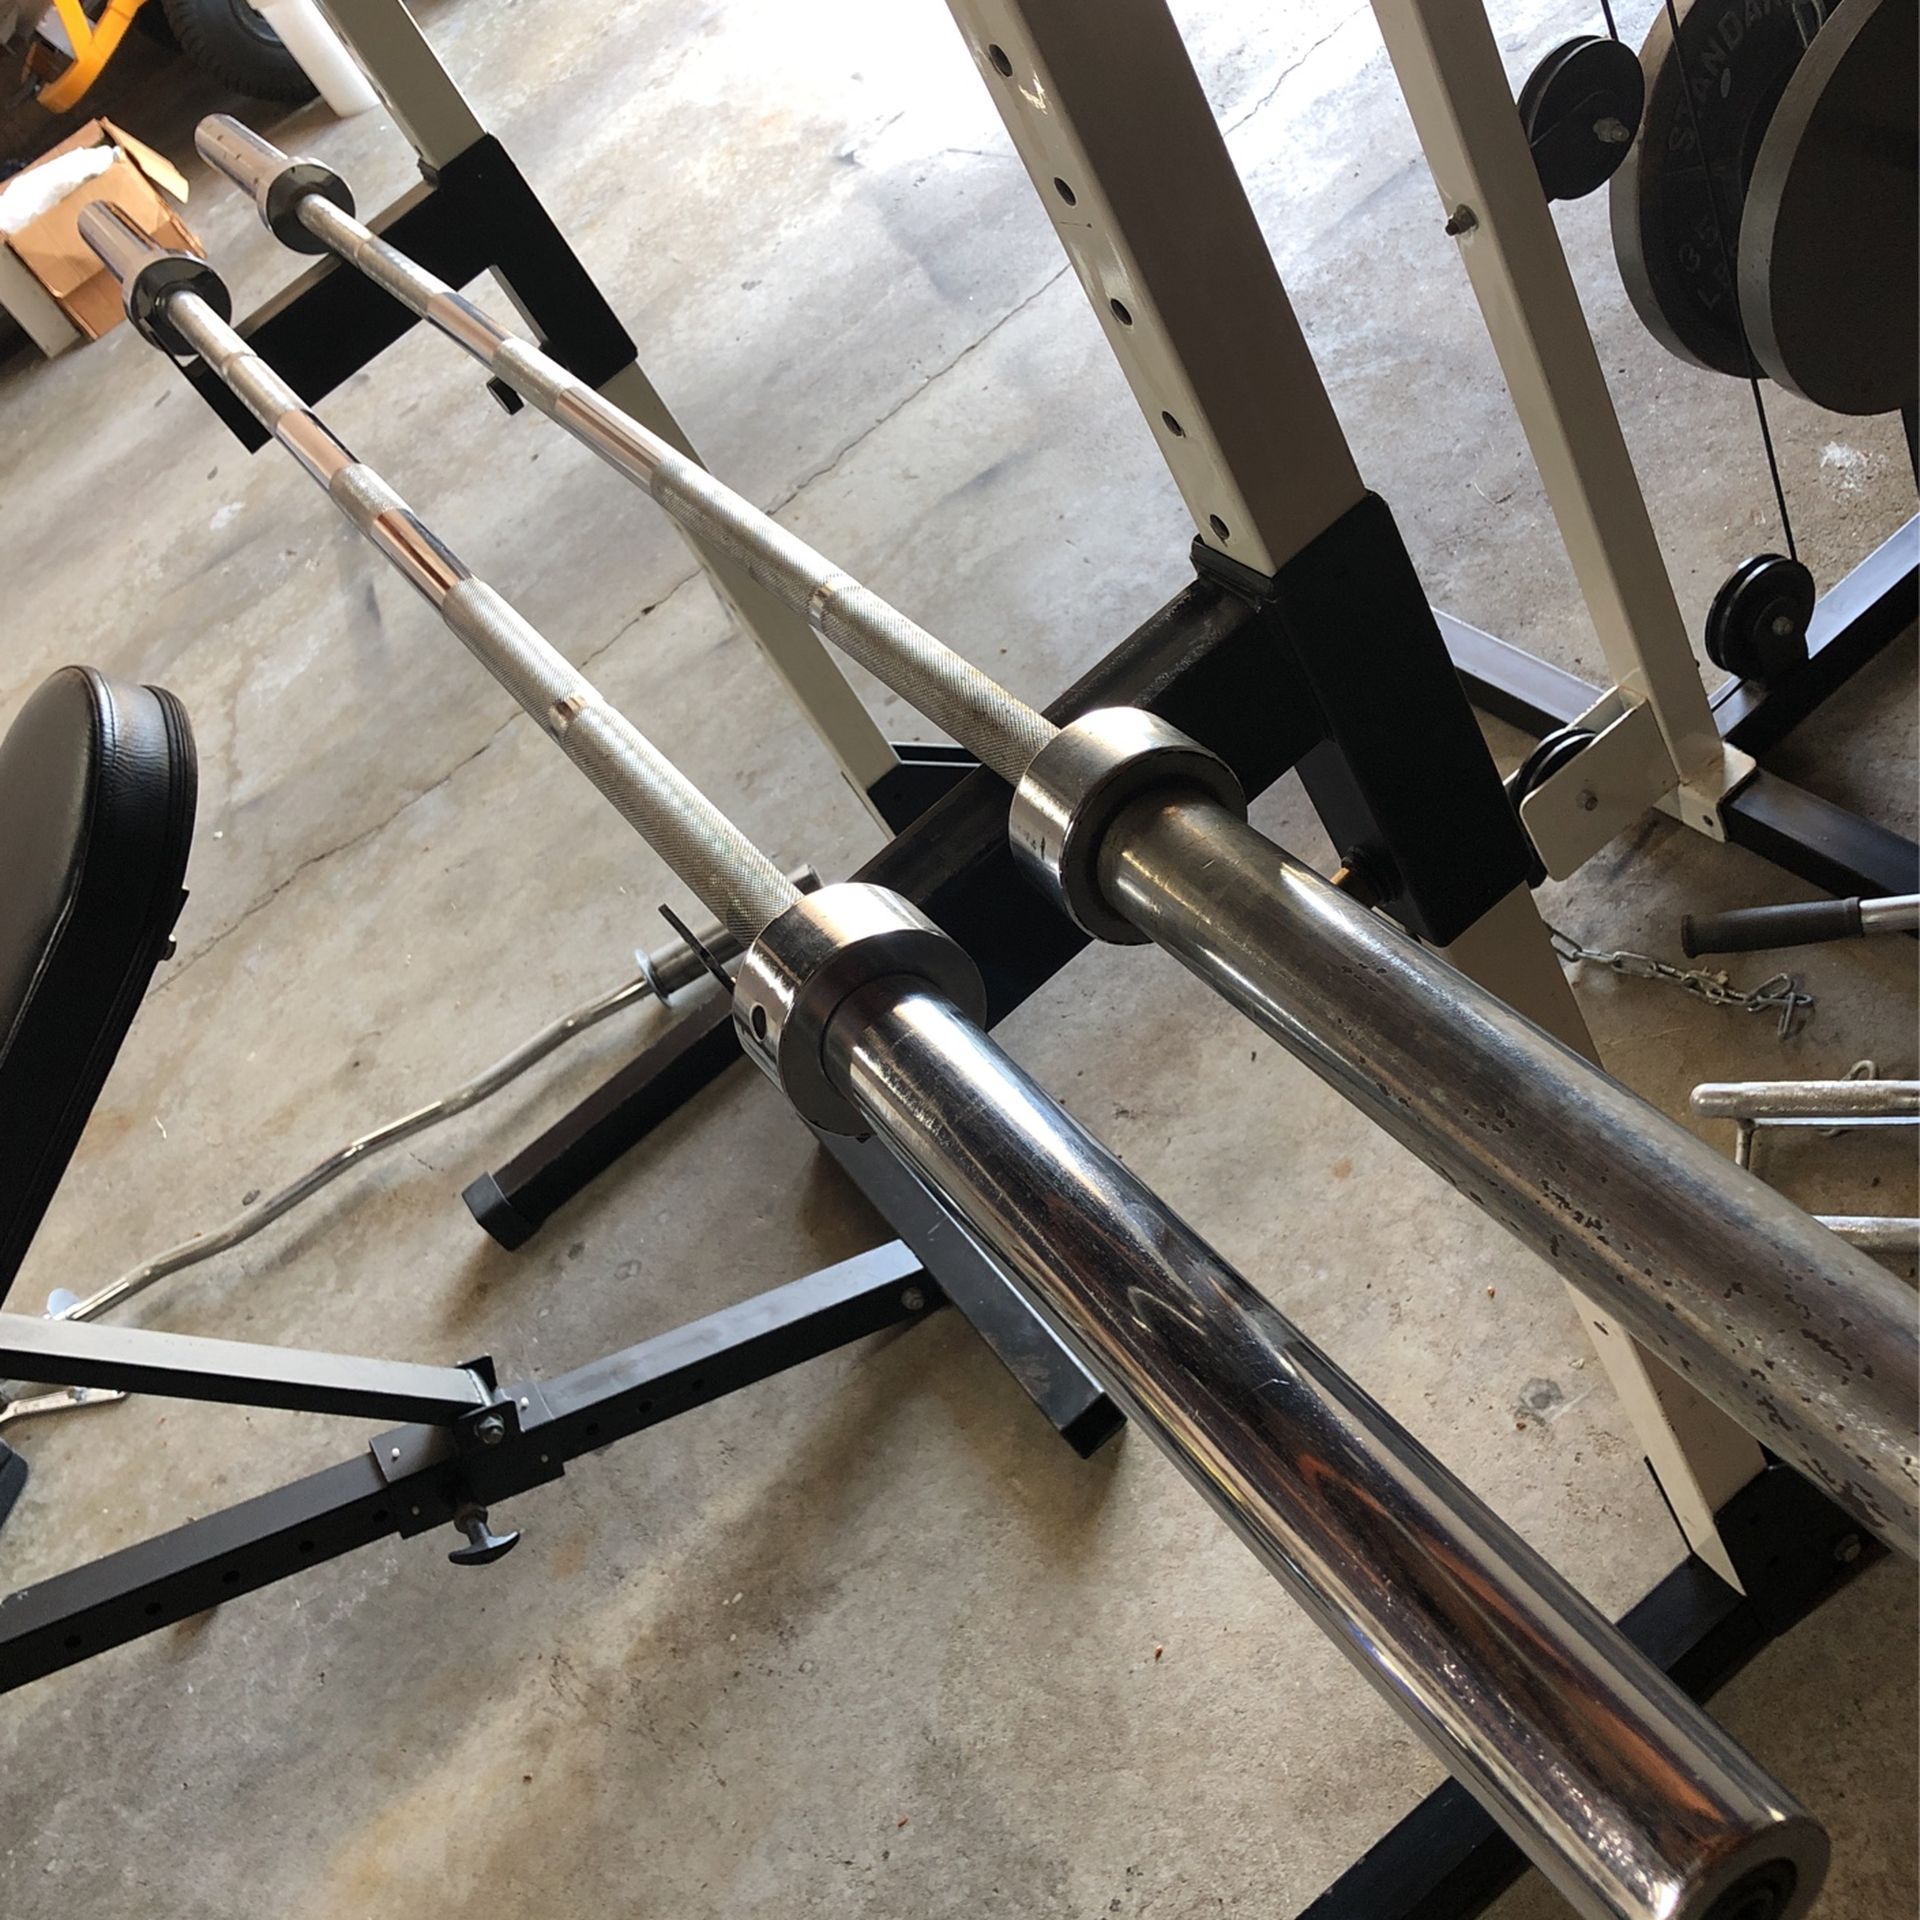 7’ Olympic Bars, 45 And 35 Lbs - $70 And $50